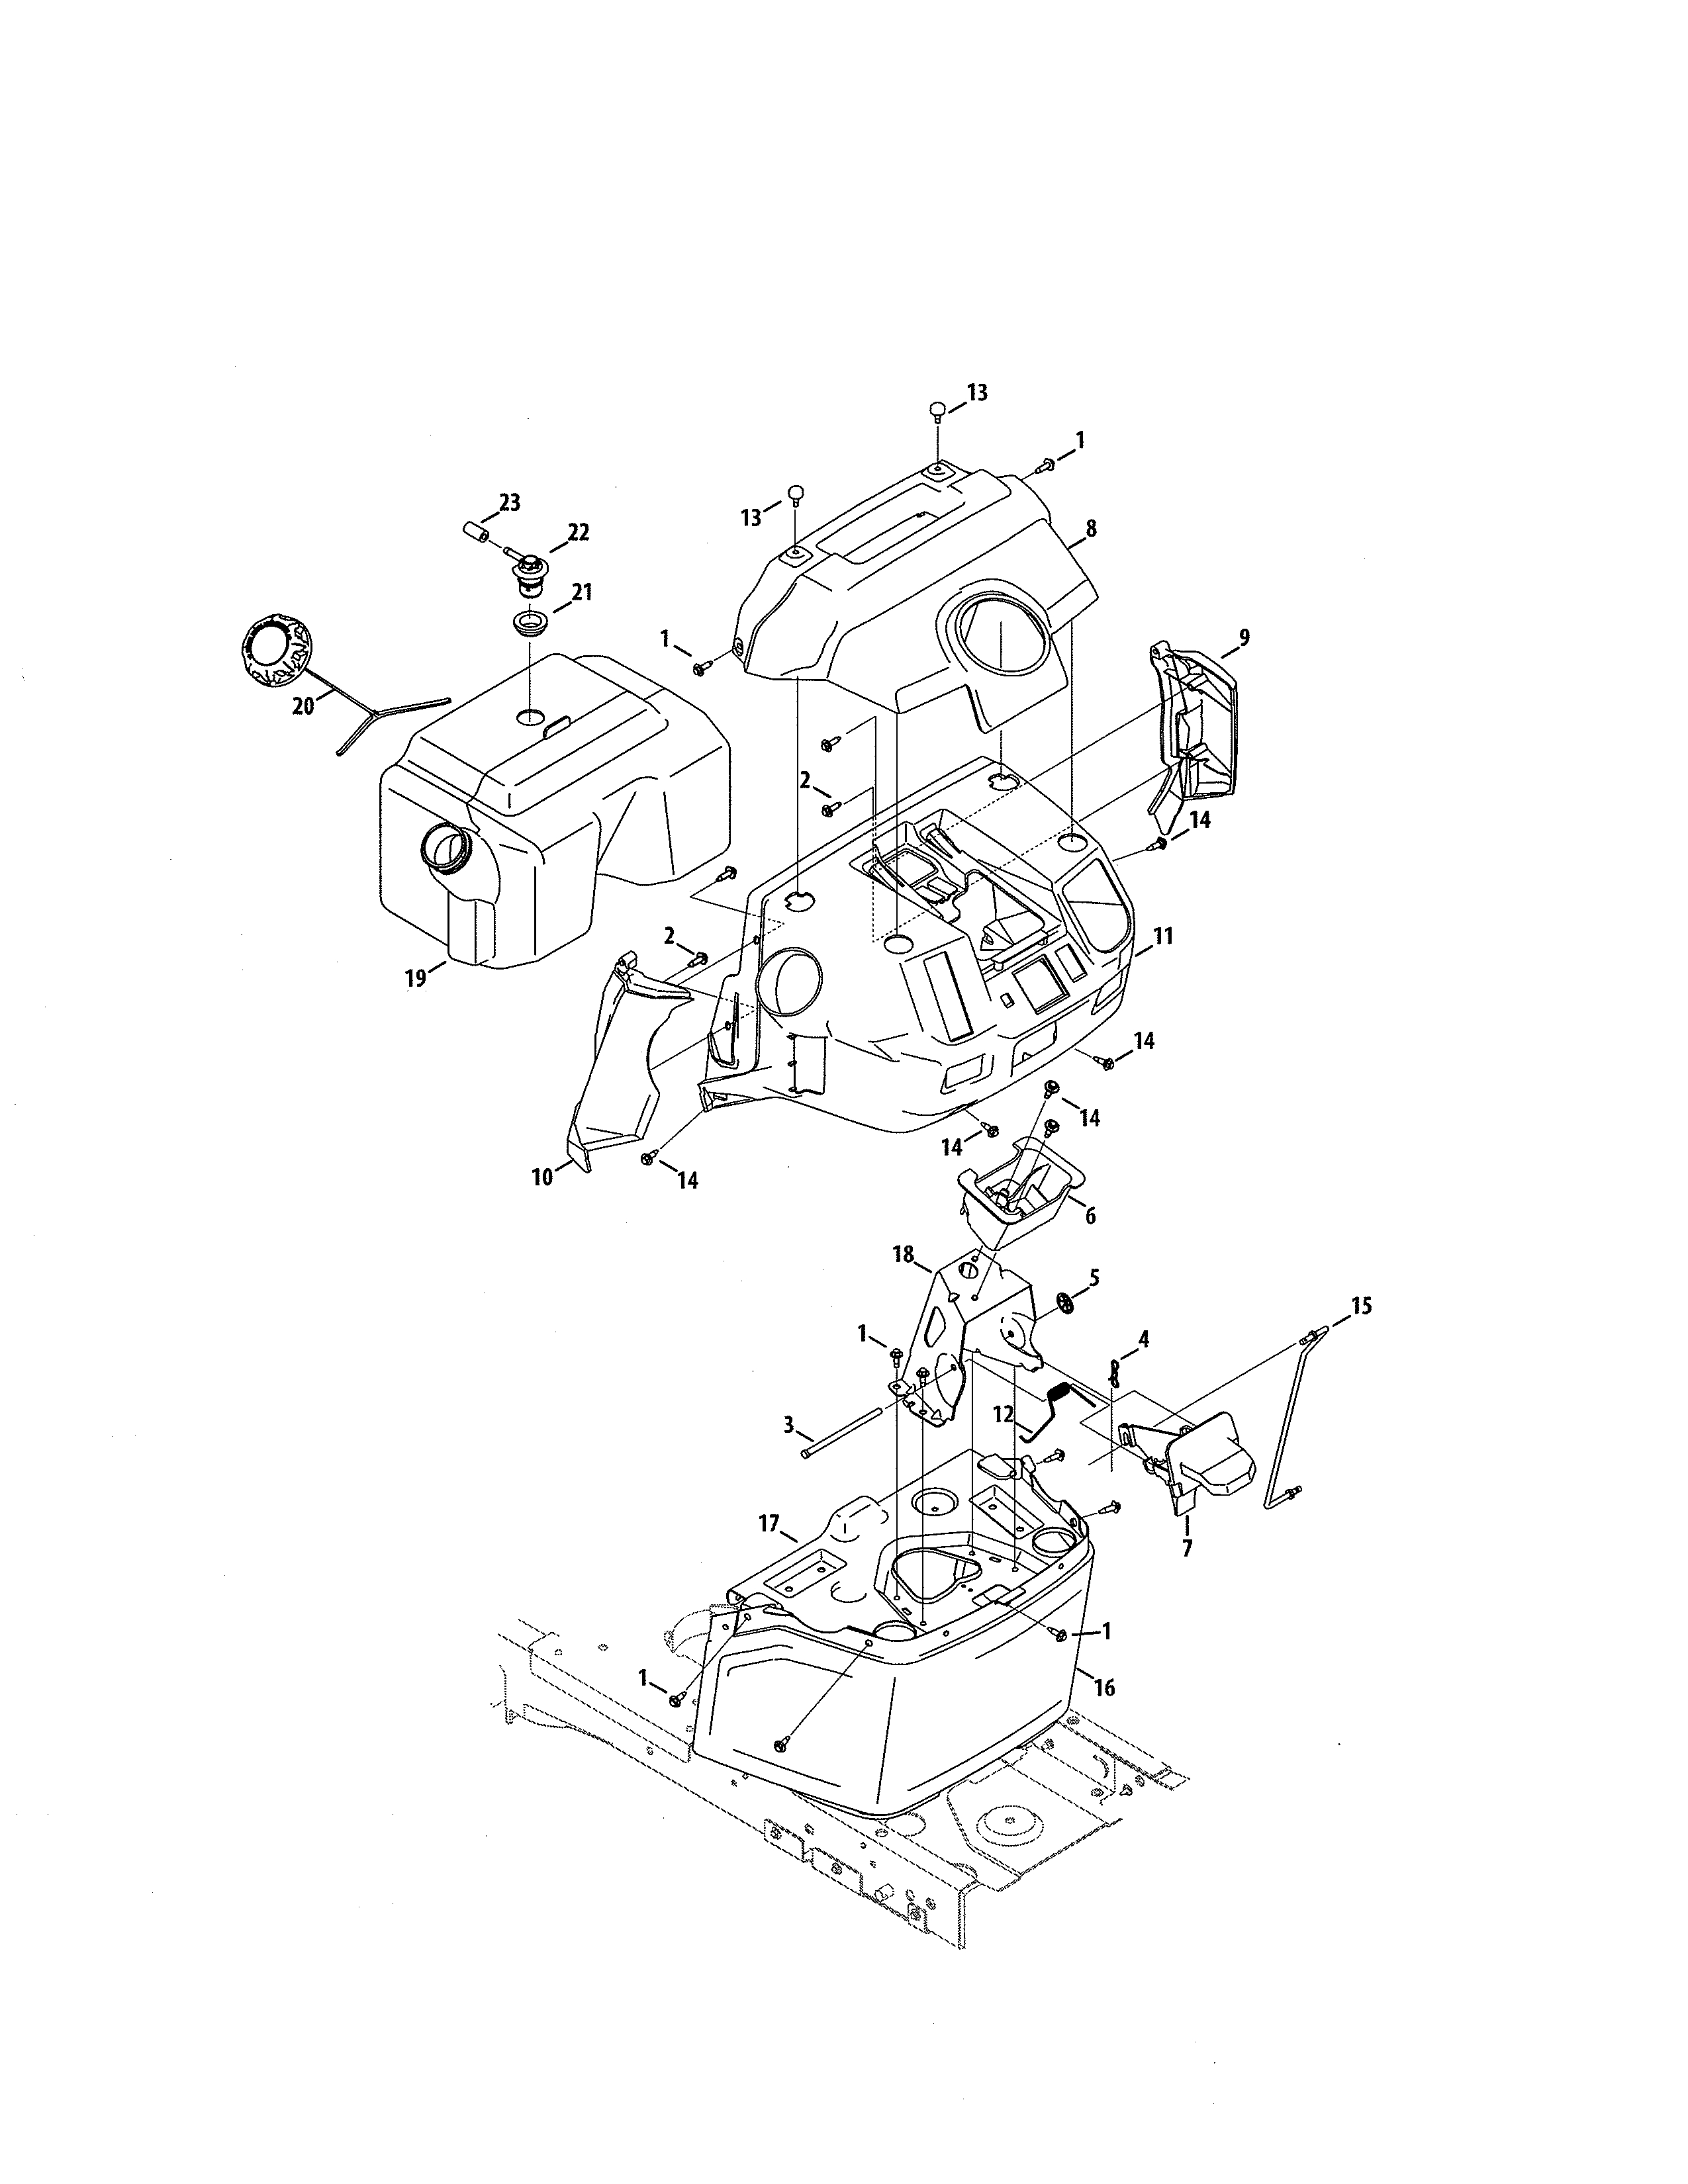 Craftsman Hydrostatic Transmission Diagram Looking For Craftsman Model 247204420 Front Engine Lawn Tractor